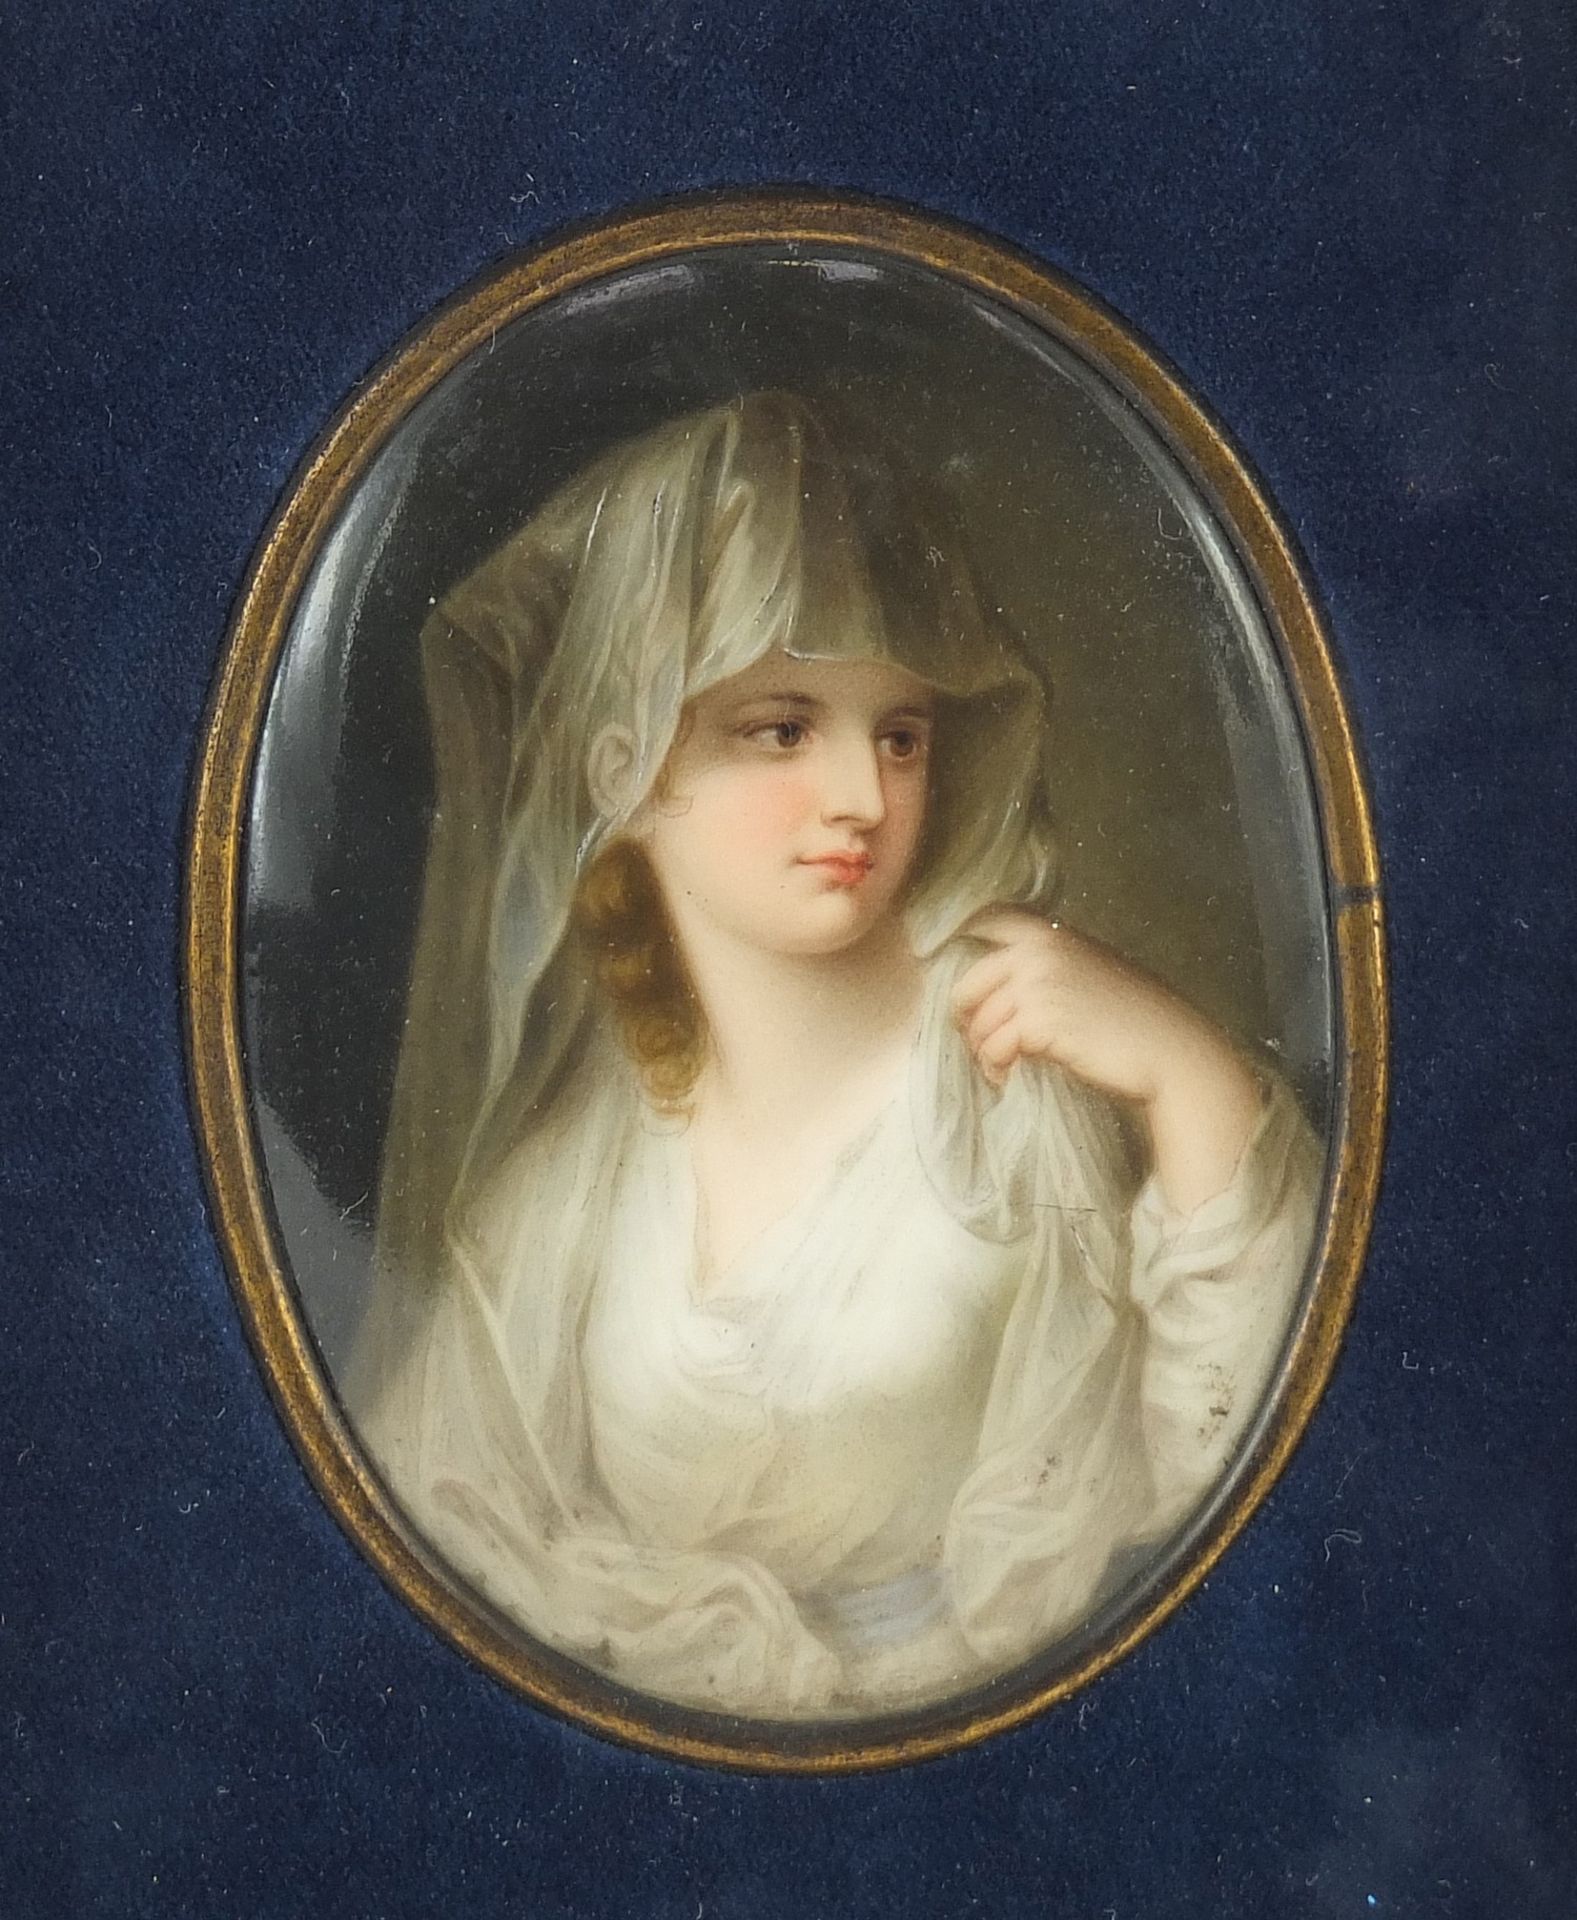 19th century naval interest oval porcelain plaque hand painted with a portrait of Lady Hamilton, - Image 2 of 4